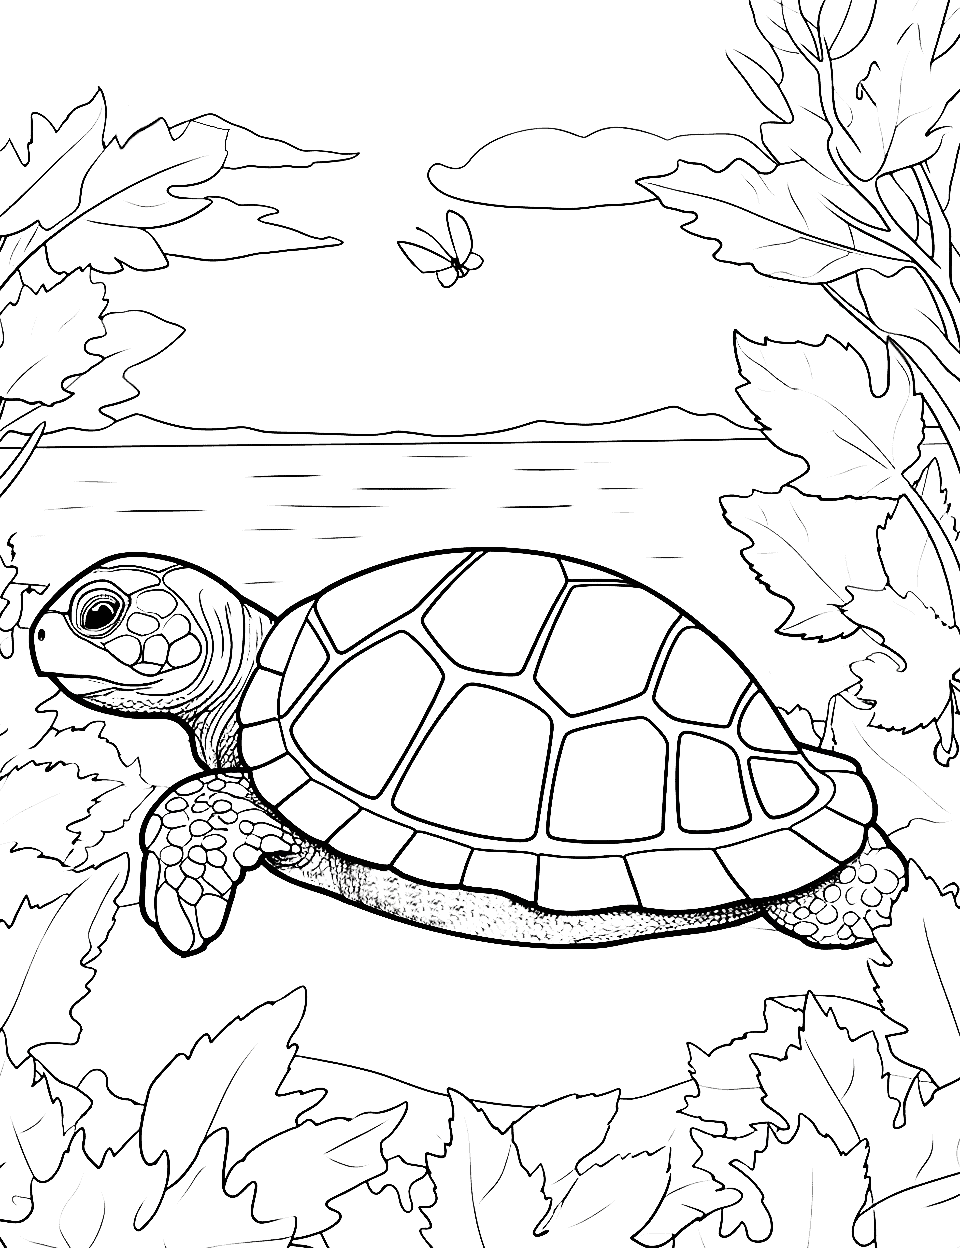 Autumn Turtles Turtle Coloring Page - Turtles enjoying the colorful leaves of fall around them.